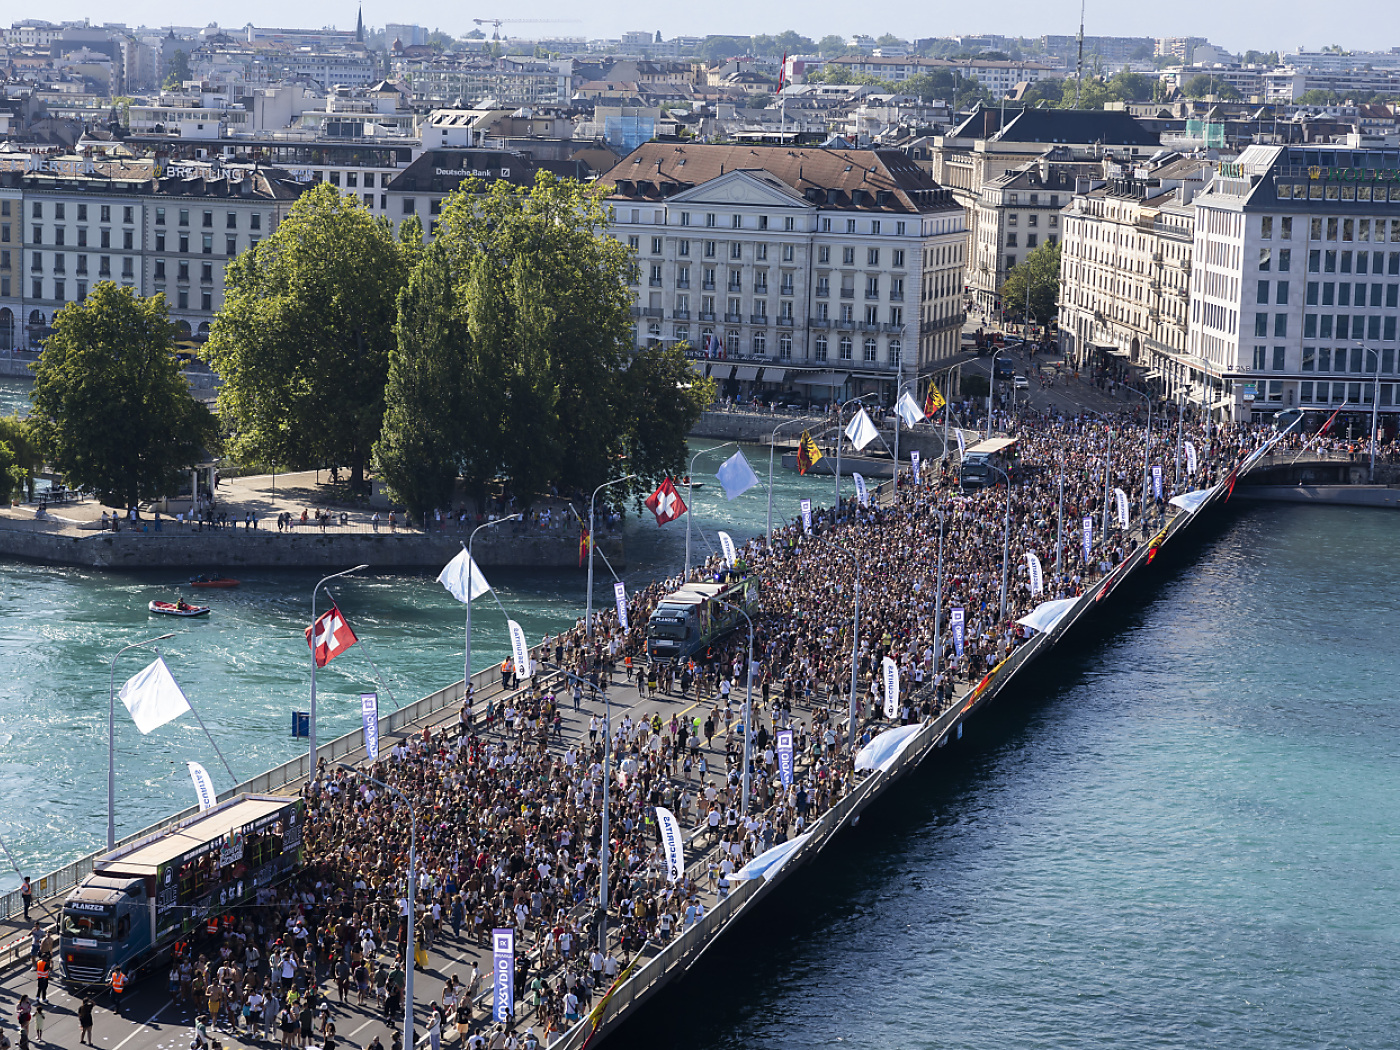 Lake Parade in Geneva attracts over 100,000 people